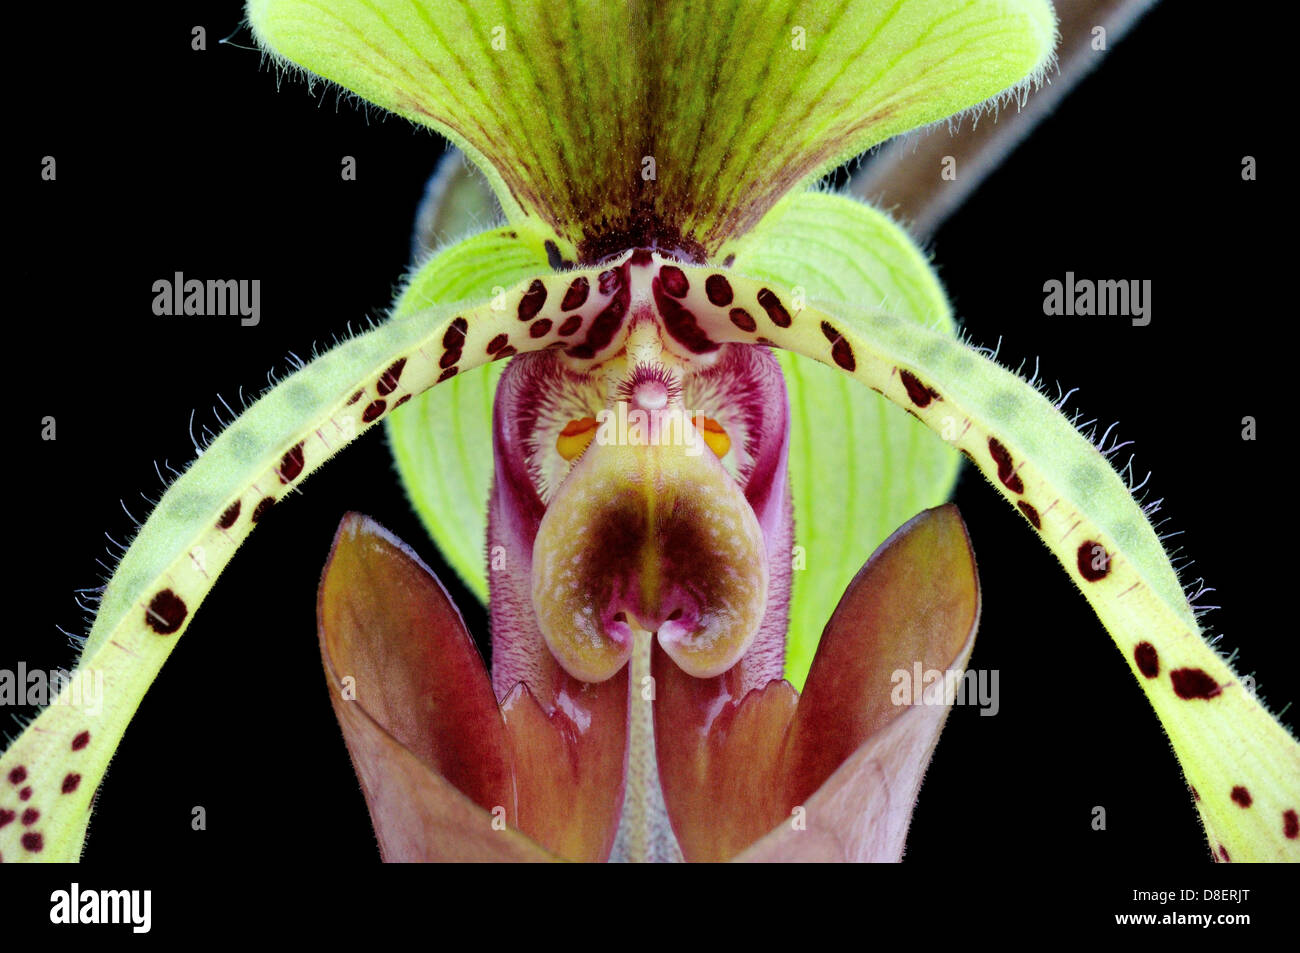 Lady's slipper orchid flower close-up, Paphiopedilum lowii Stock Photo